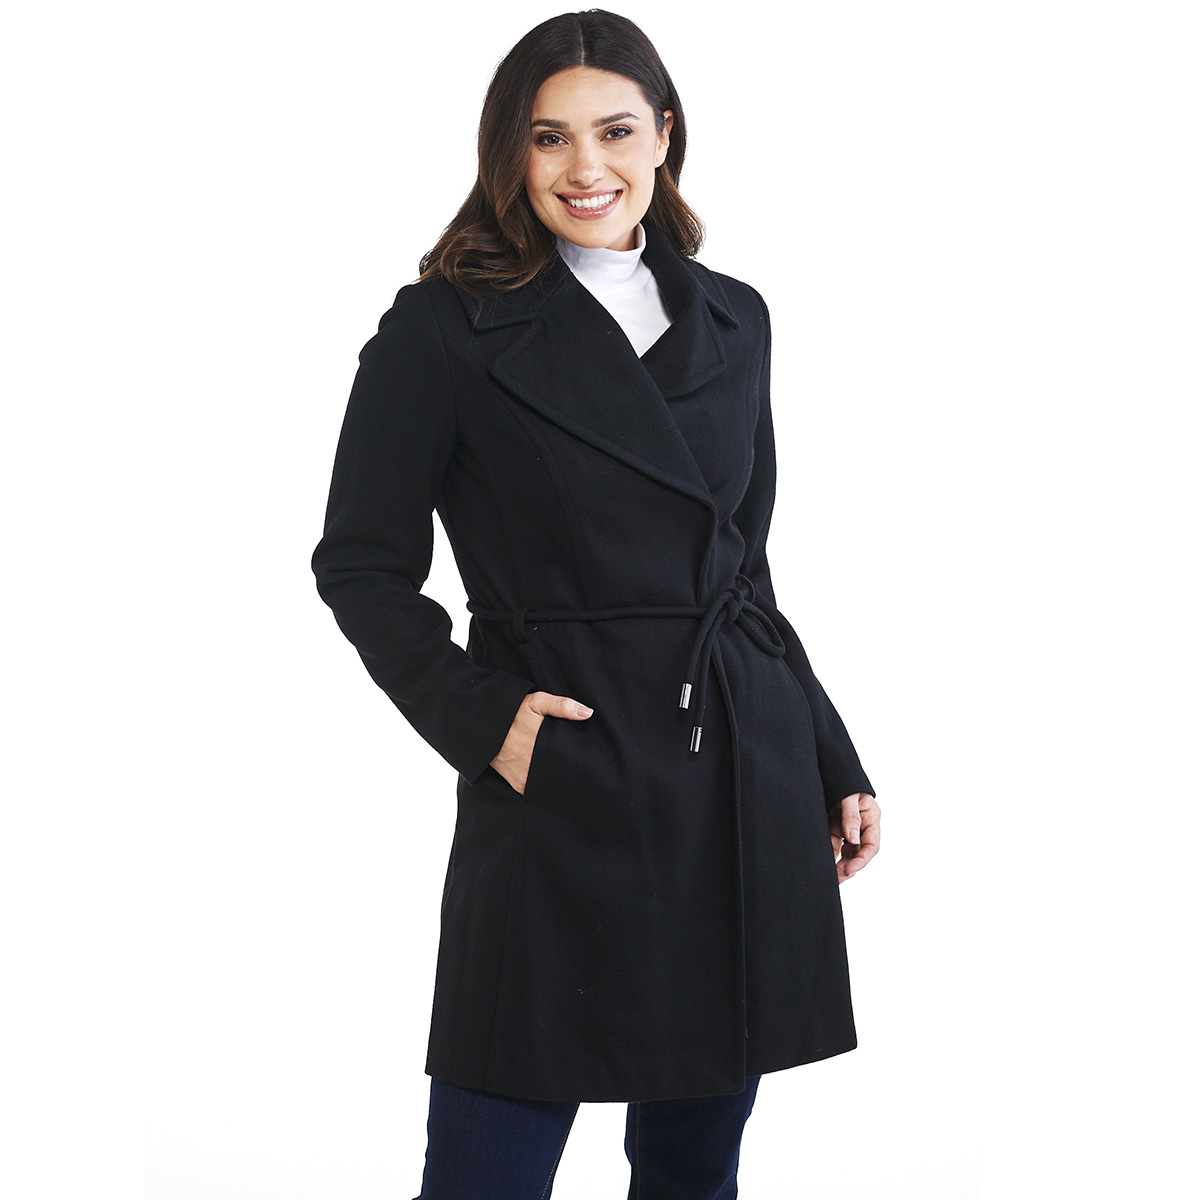 Womens Laundry By Shelli Segal Belted Wool Coat W/Snaps